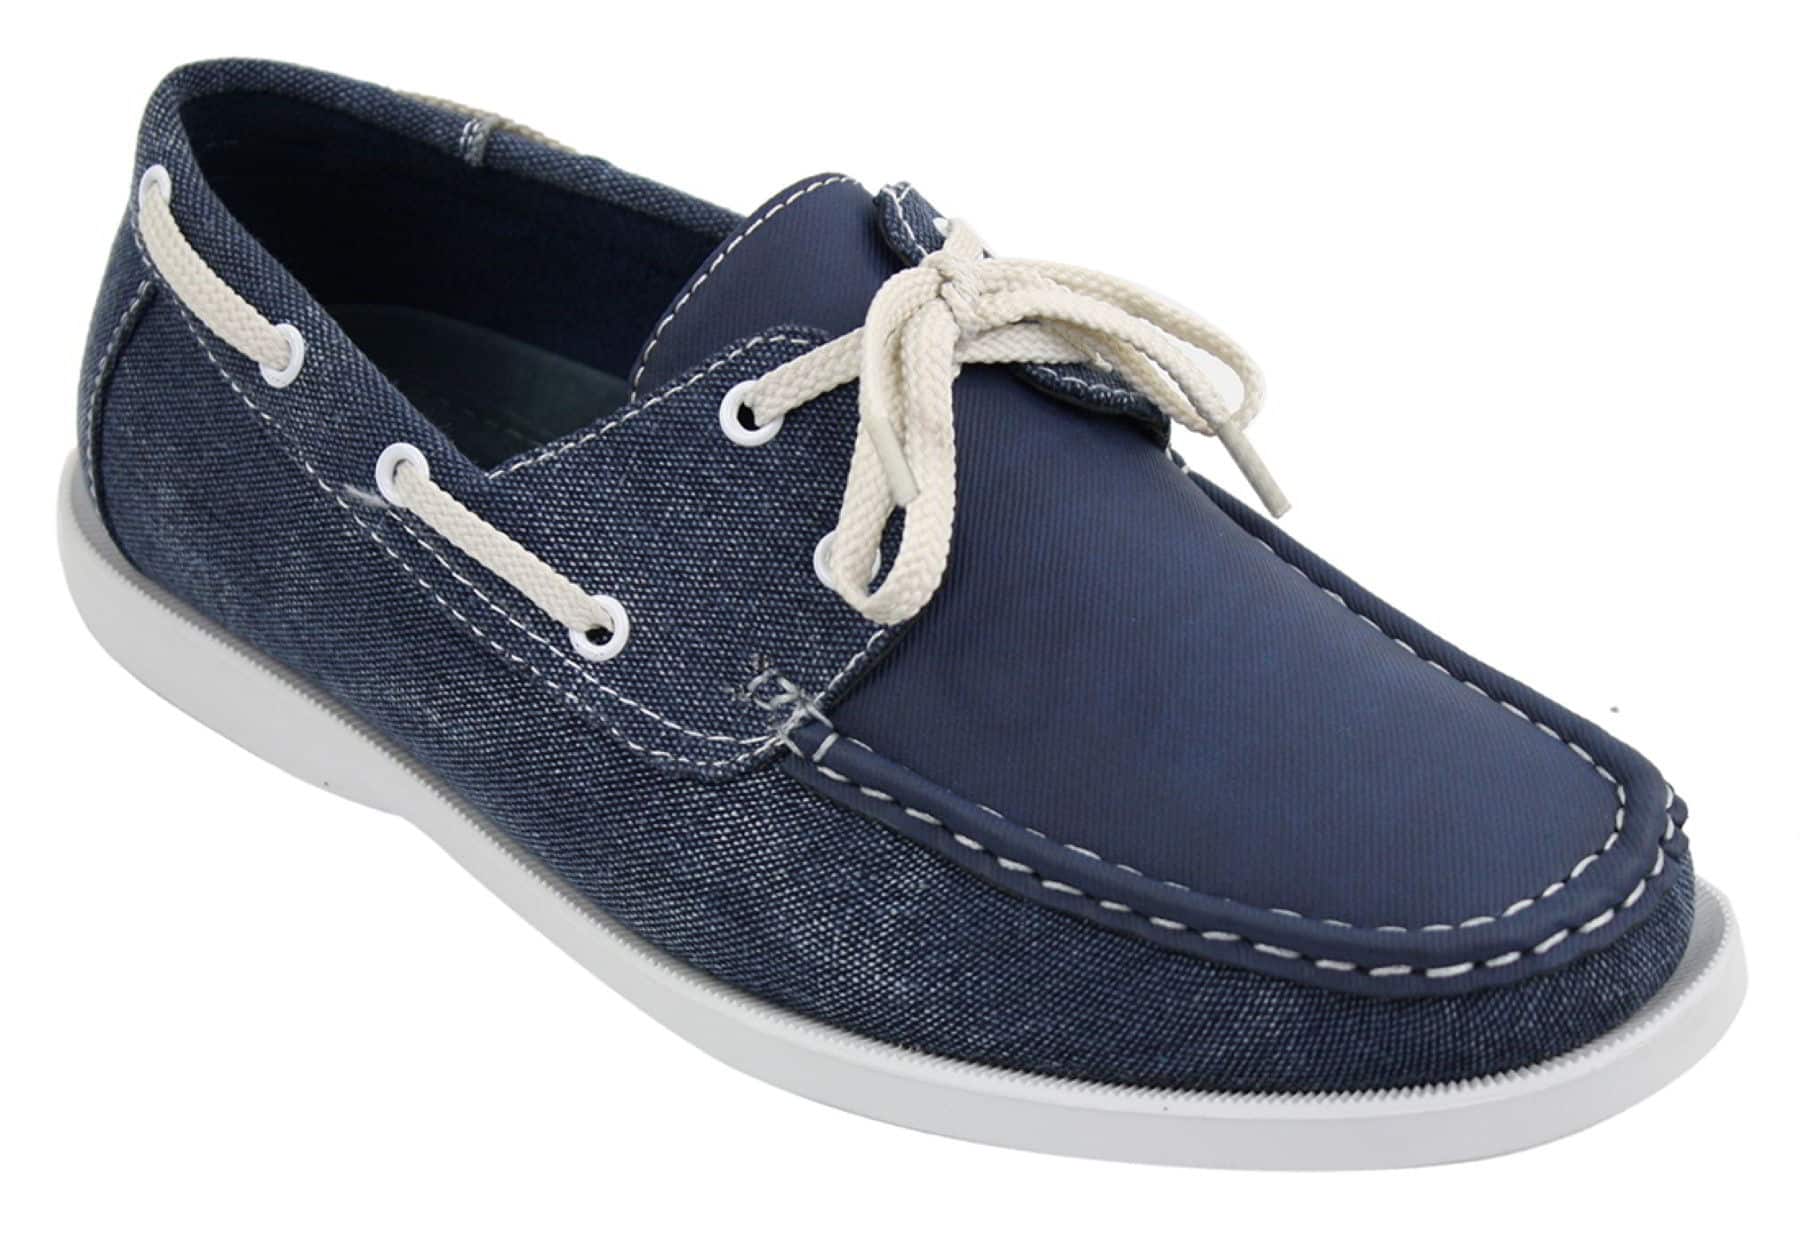 Mens Retro Denim Style Vintage Deck Boat Shoes Smart Casual Laced Navy ...